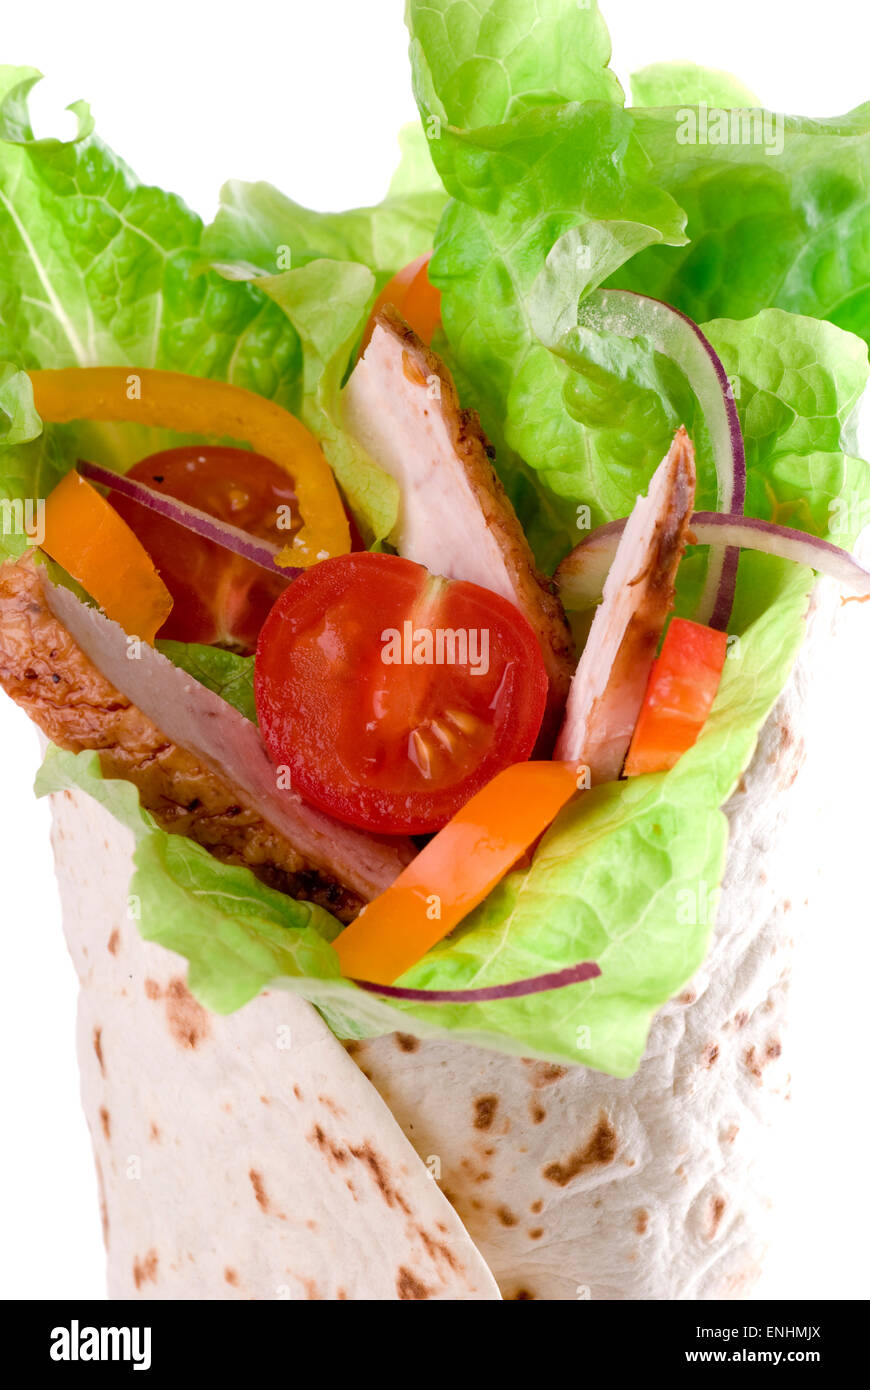 Tortilla wrap with vegetables and meat. Stock Photo